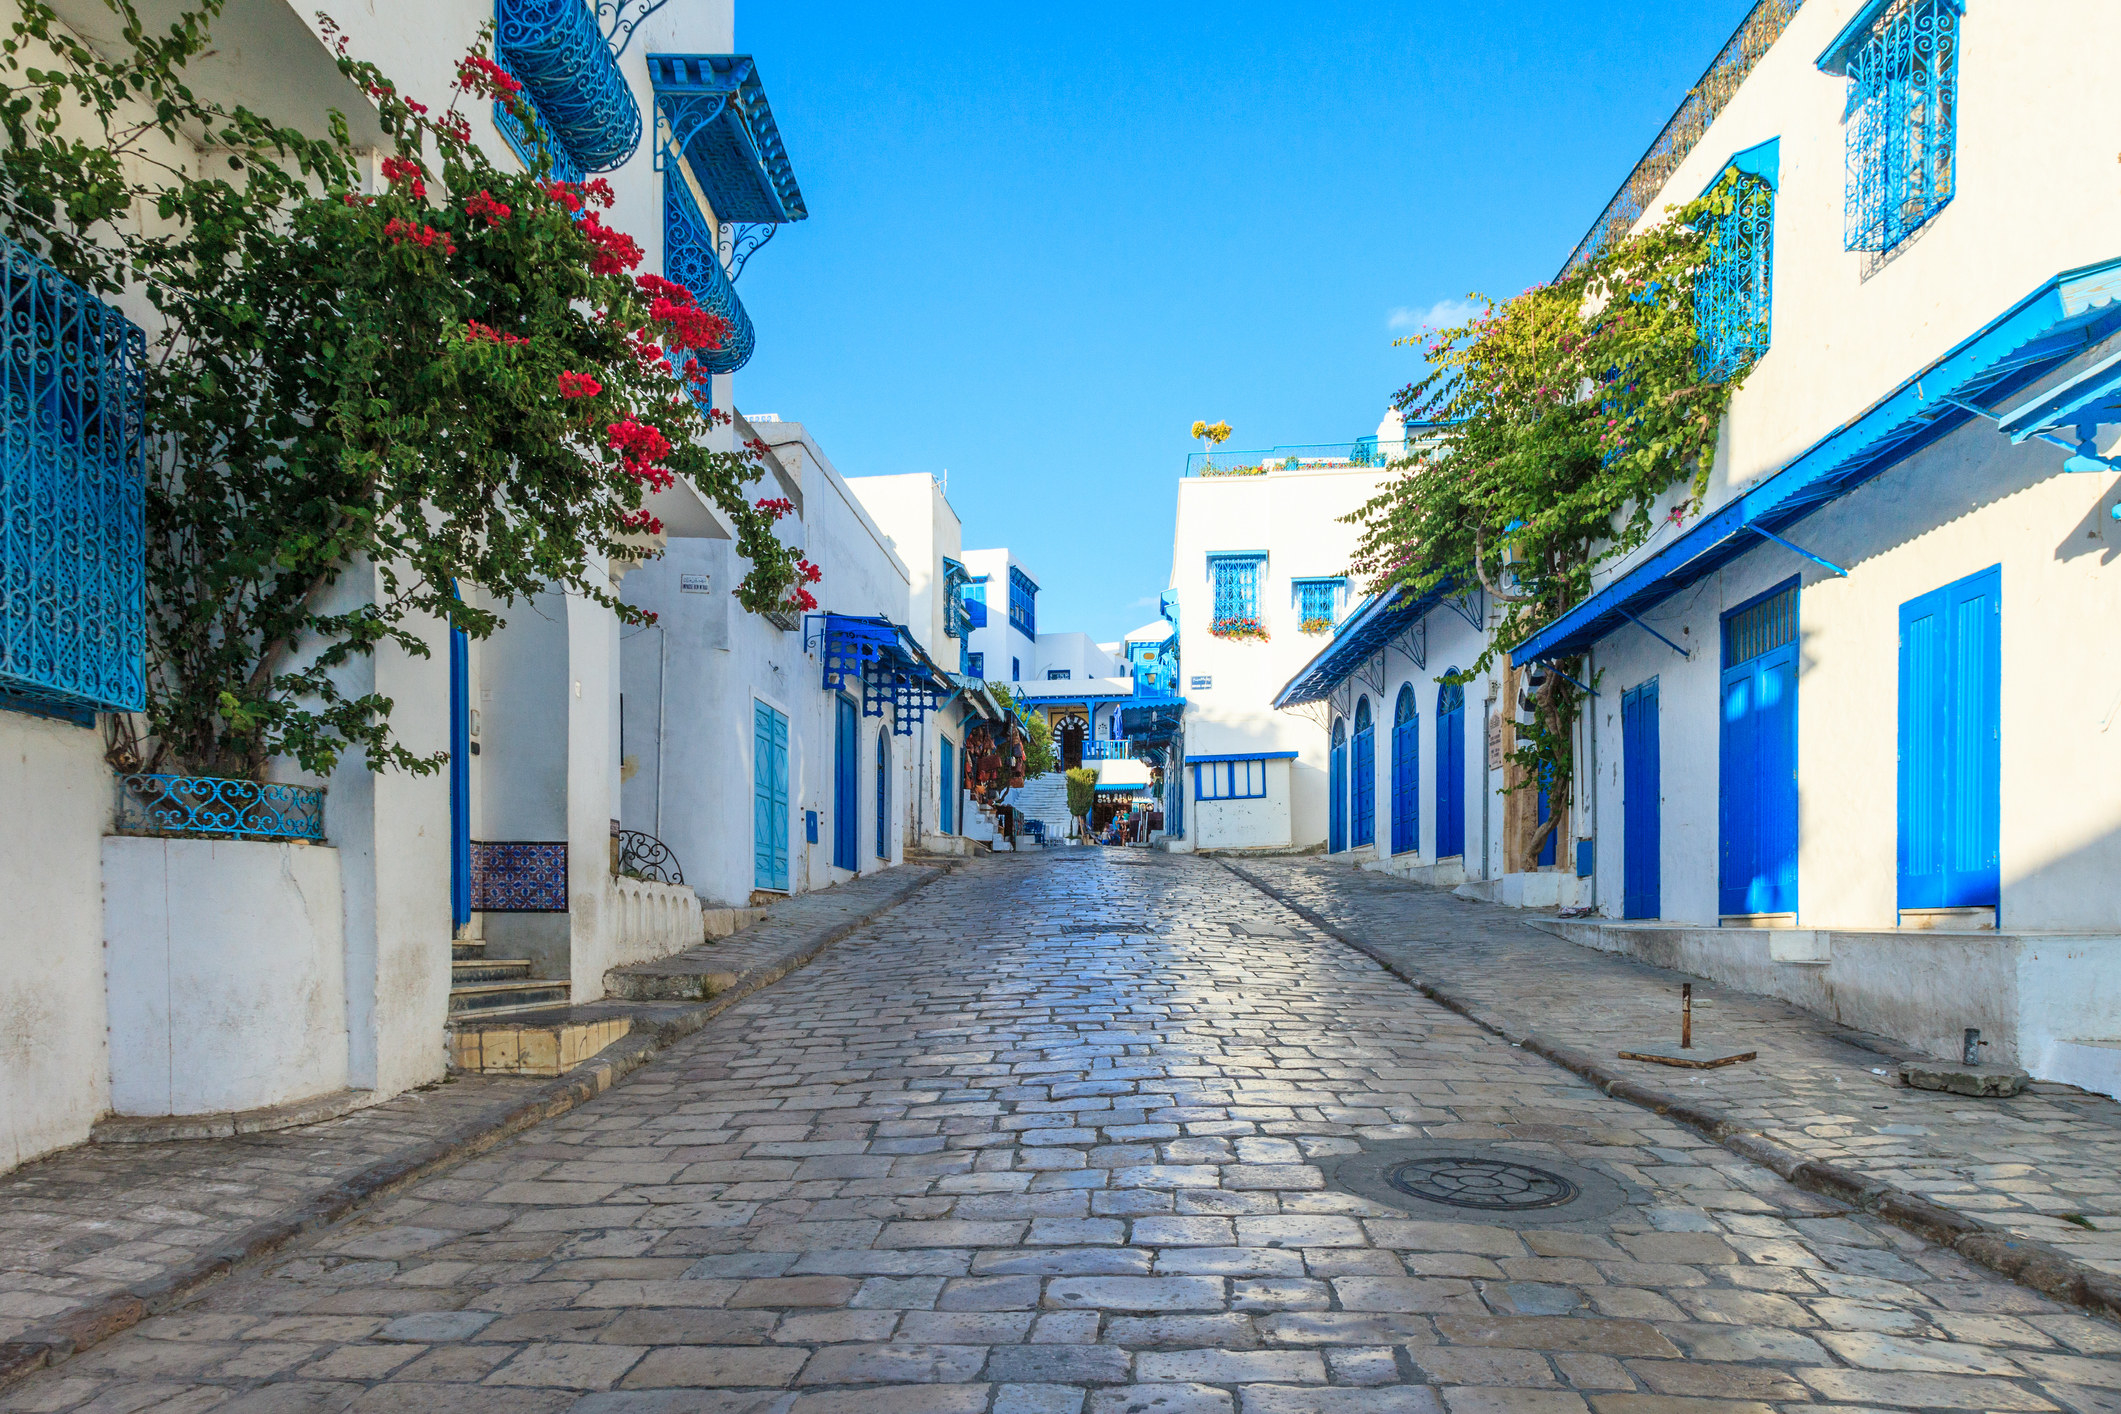 A whitewashed village with blue doors